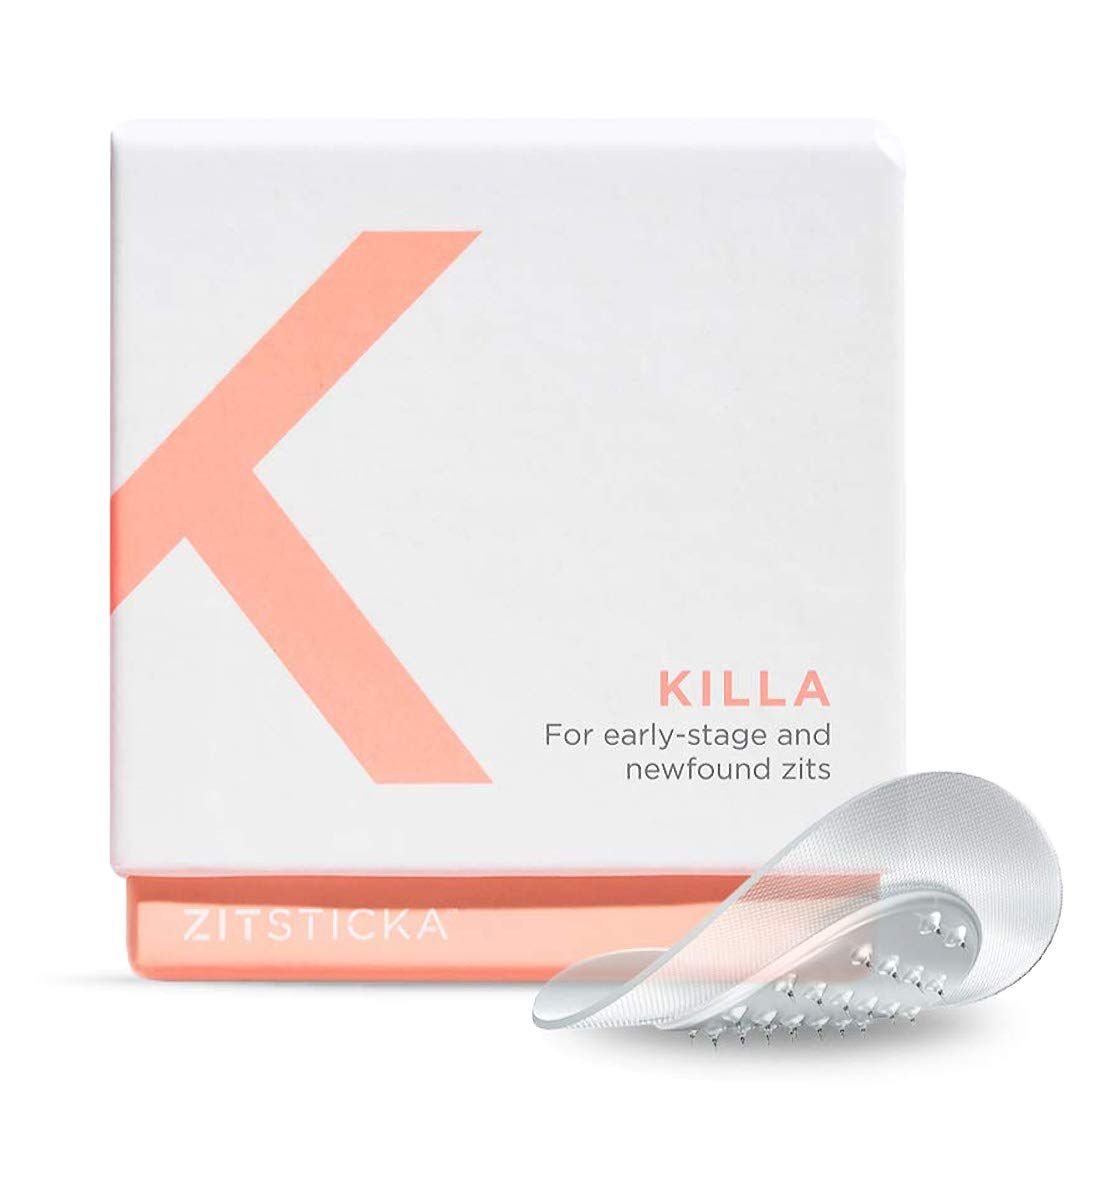 KILLA Kit by ZitSticka, Pimple Patch, Spot Solution, 8 Patches and 8 Priming Swabs | Amazon (US)